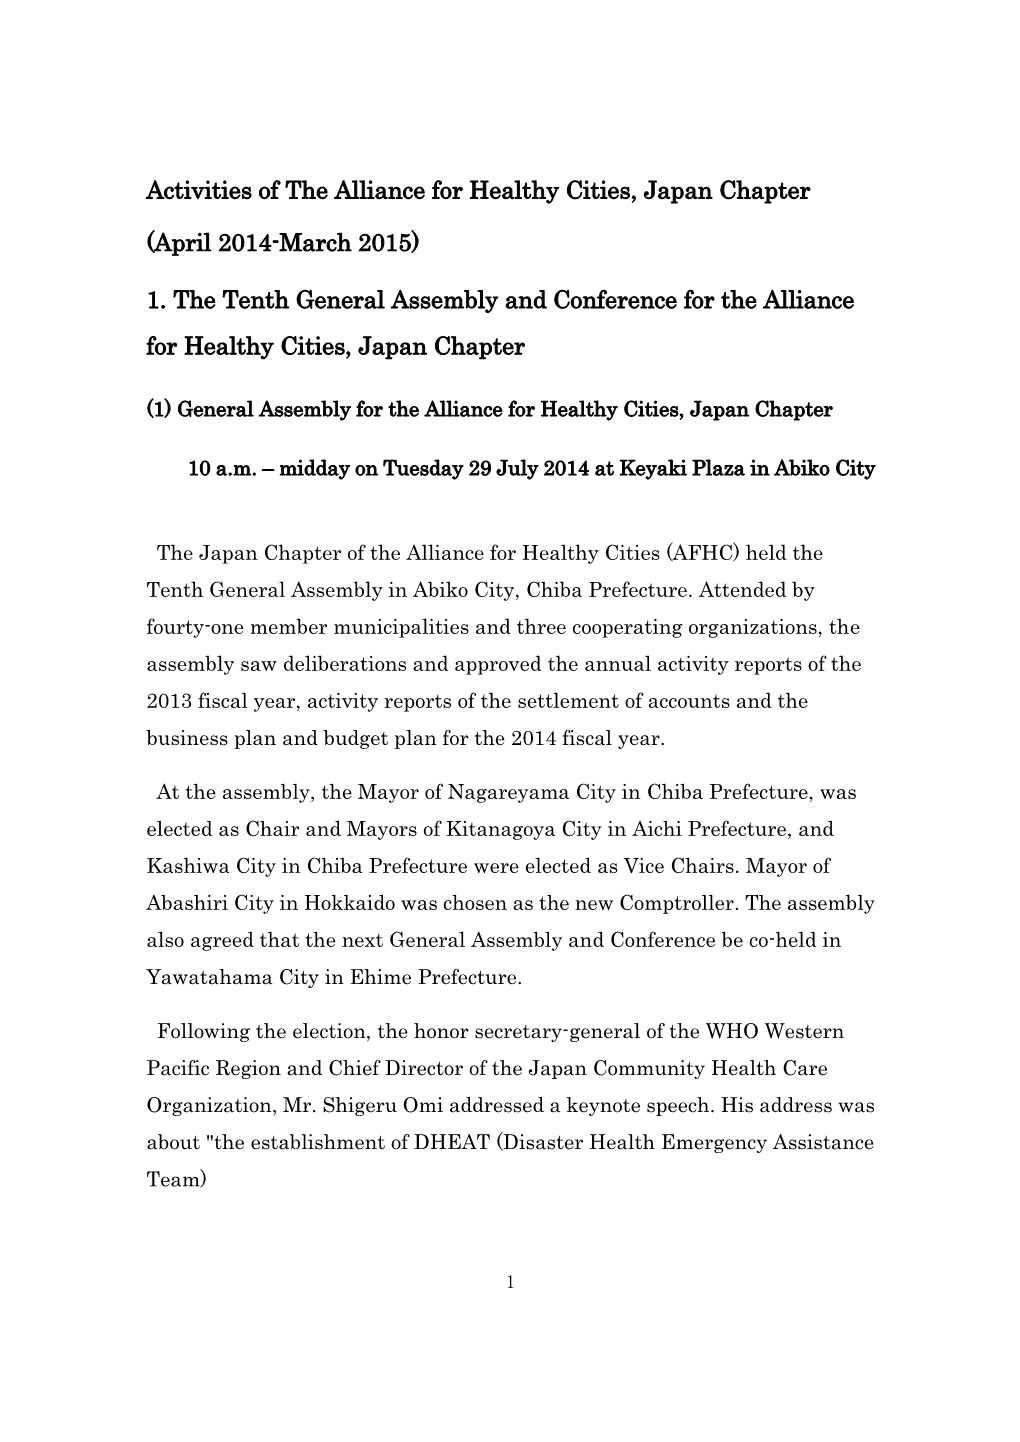 Activities of the Alliance for Healthy Cities, Japan Chapter (April 2014-March 2015) 1. the Tenth General Assembly and Conferenc